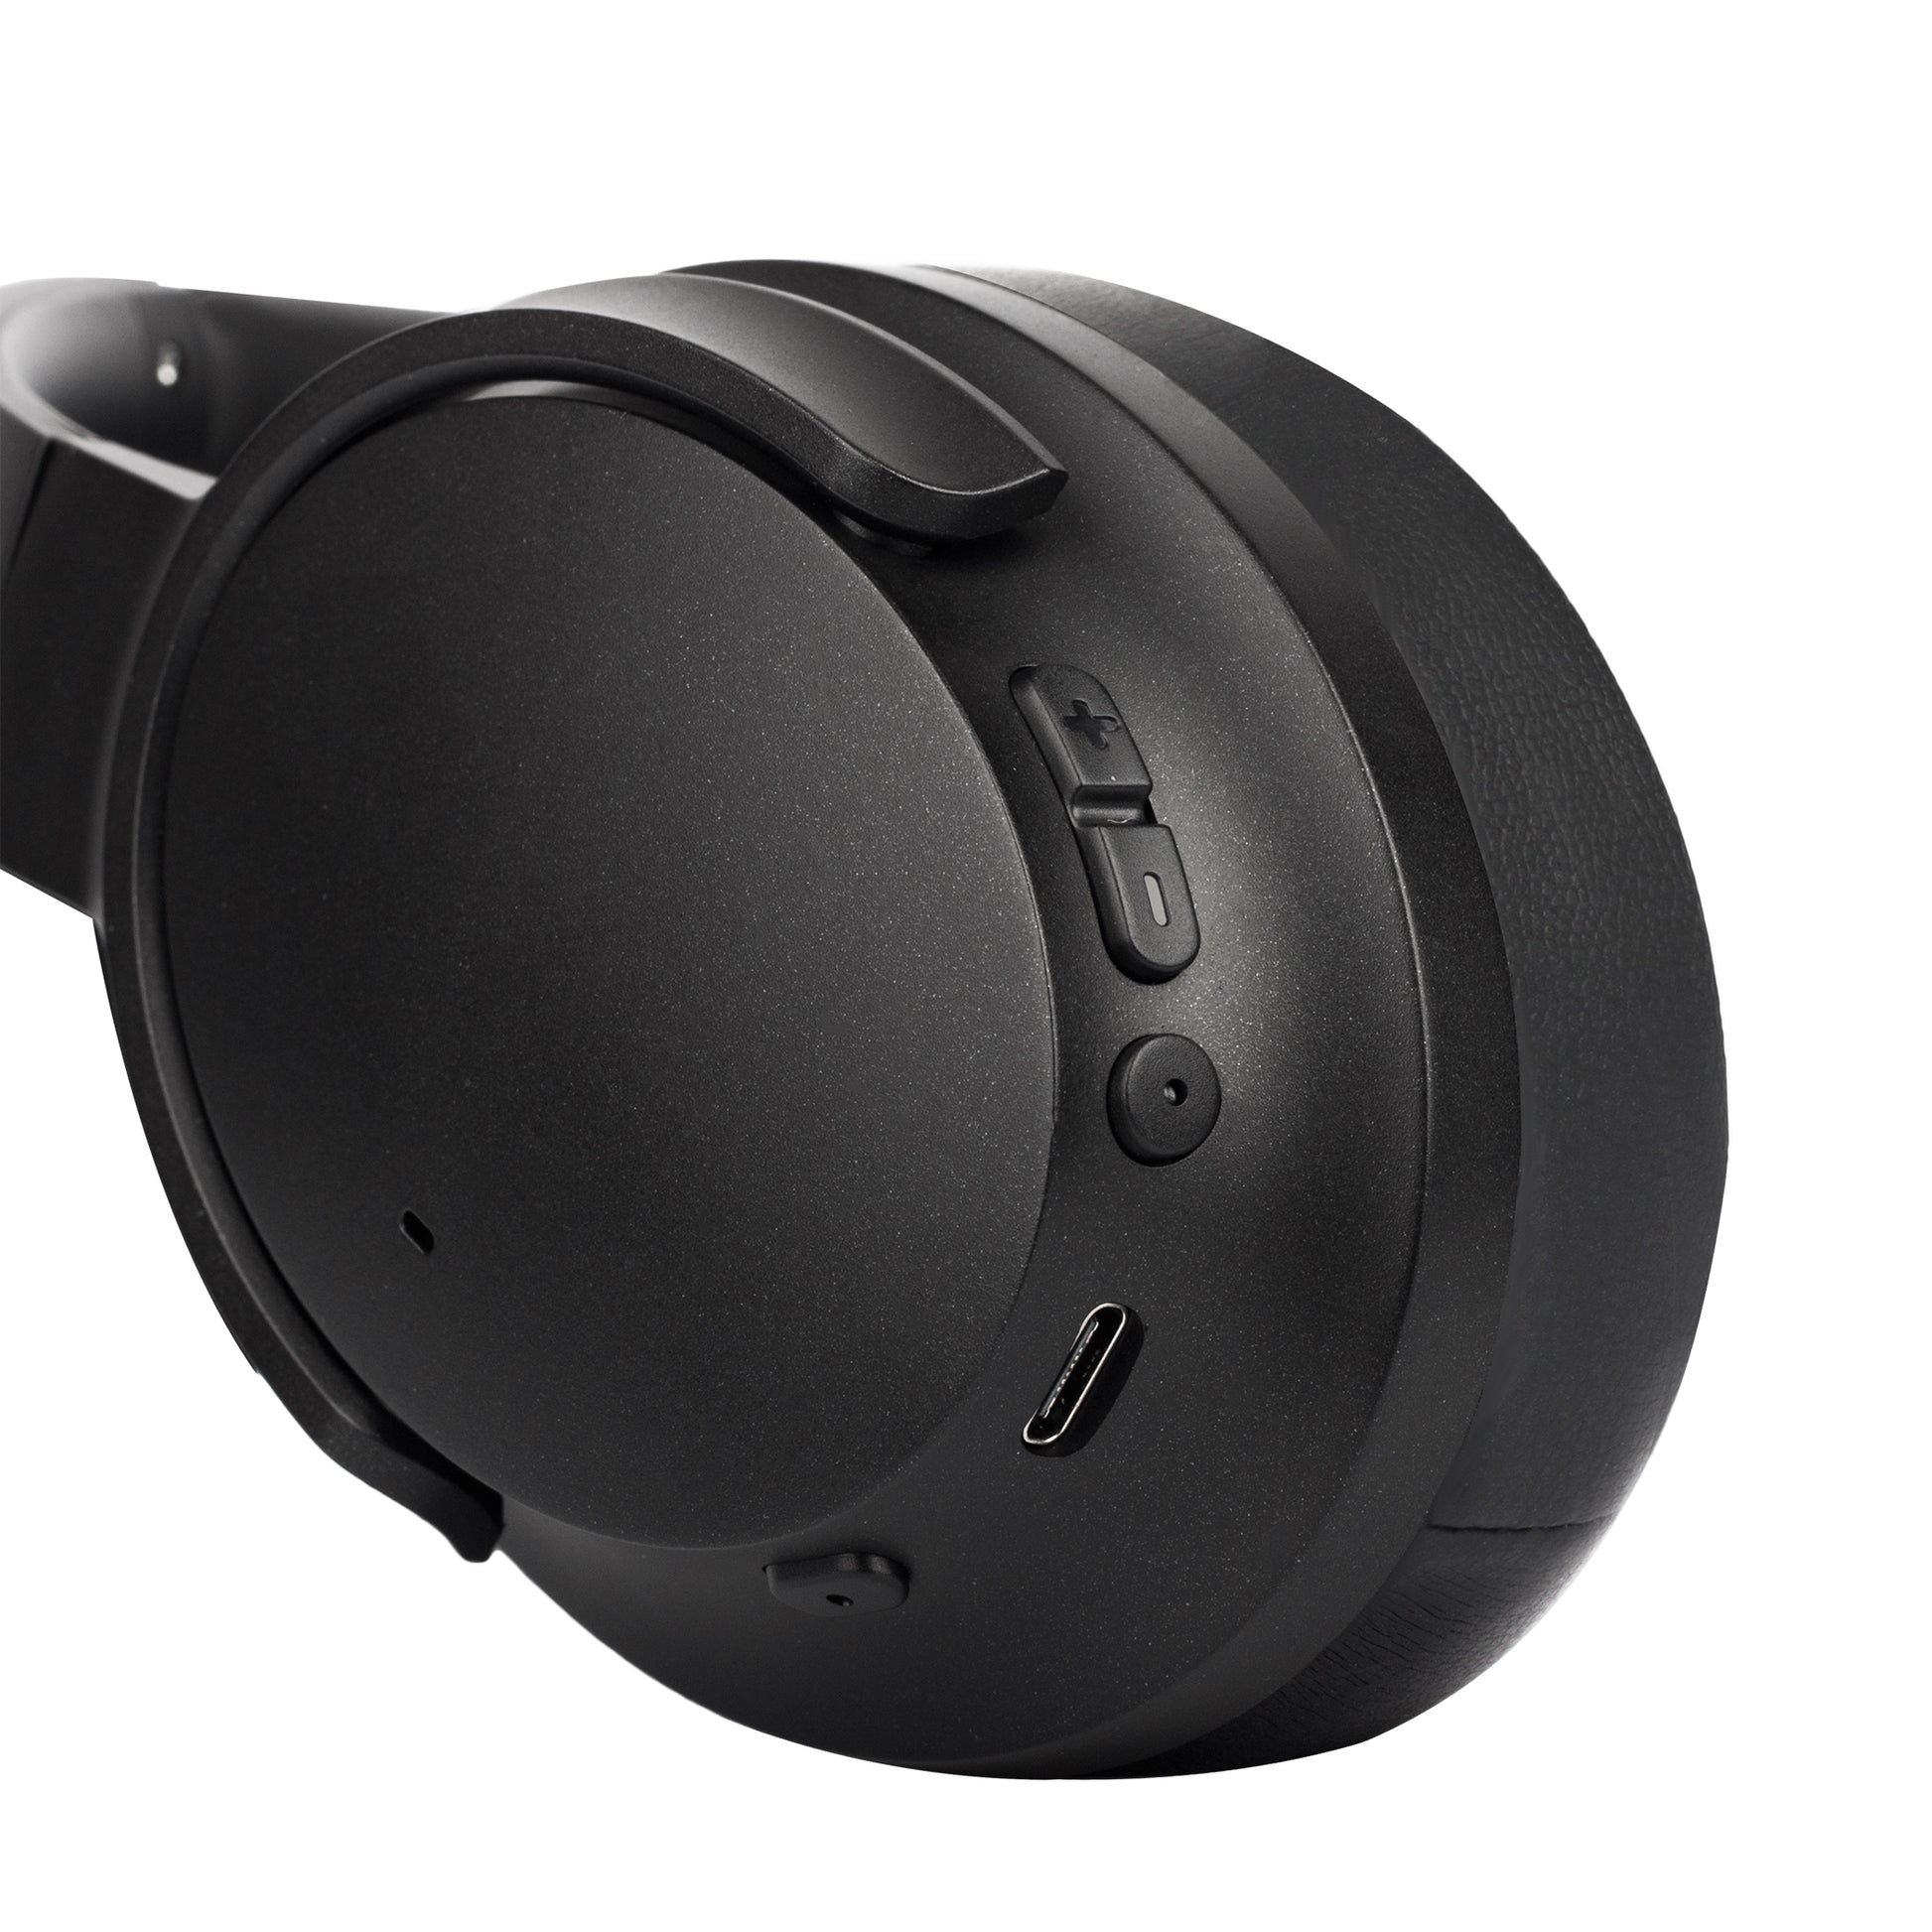 Photo of Morpheus 360 Krave HD Wireless Headphone, showing Power on/off button, Volume up/down buttons, Noise cancelling button, and USB Type-C cable port on the headphones earpiece.